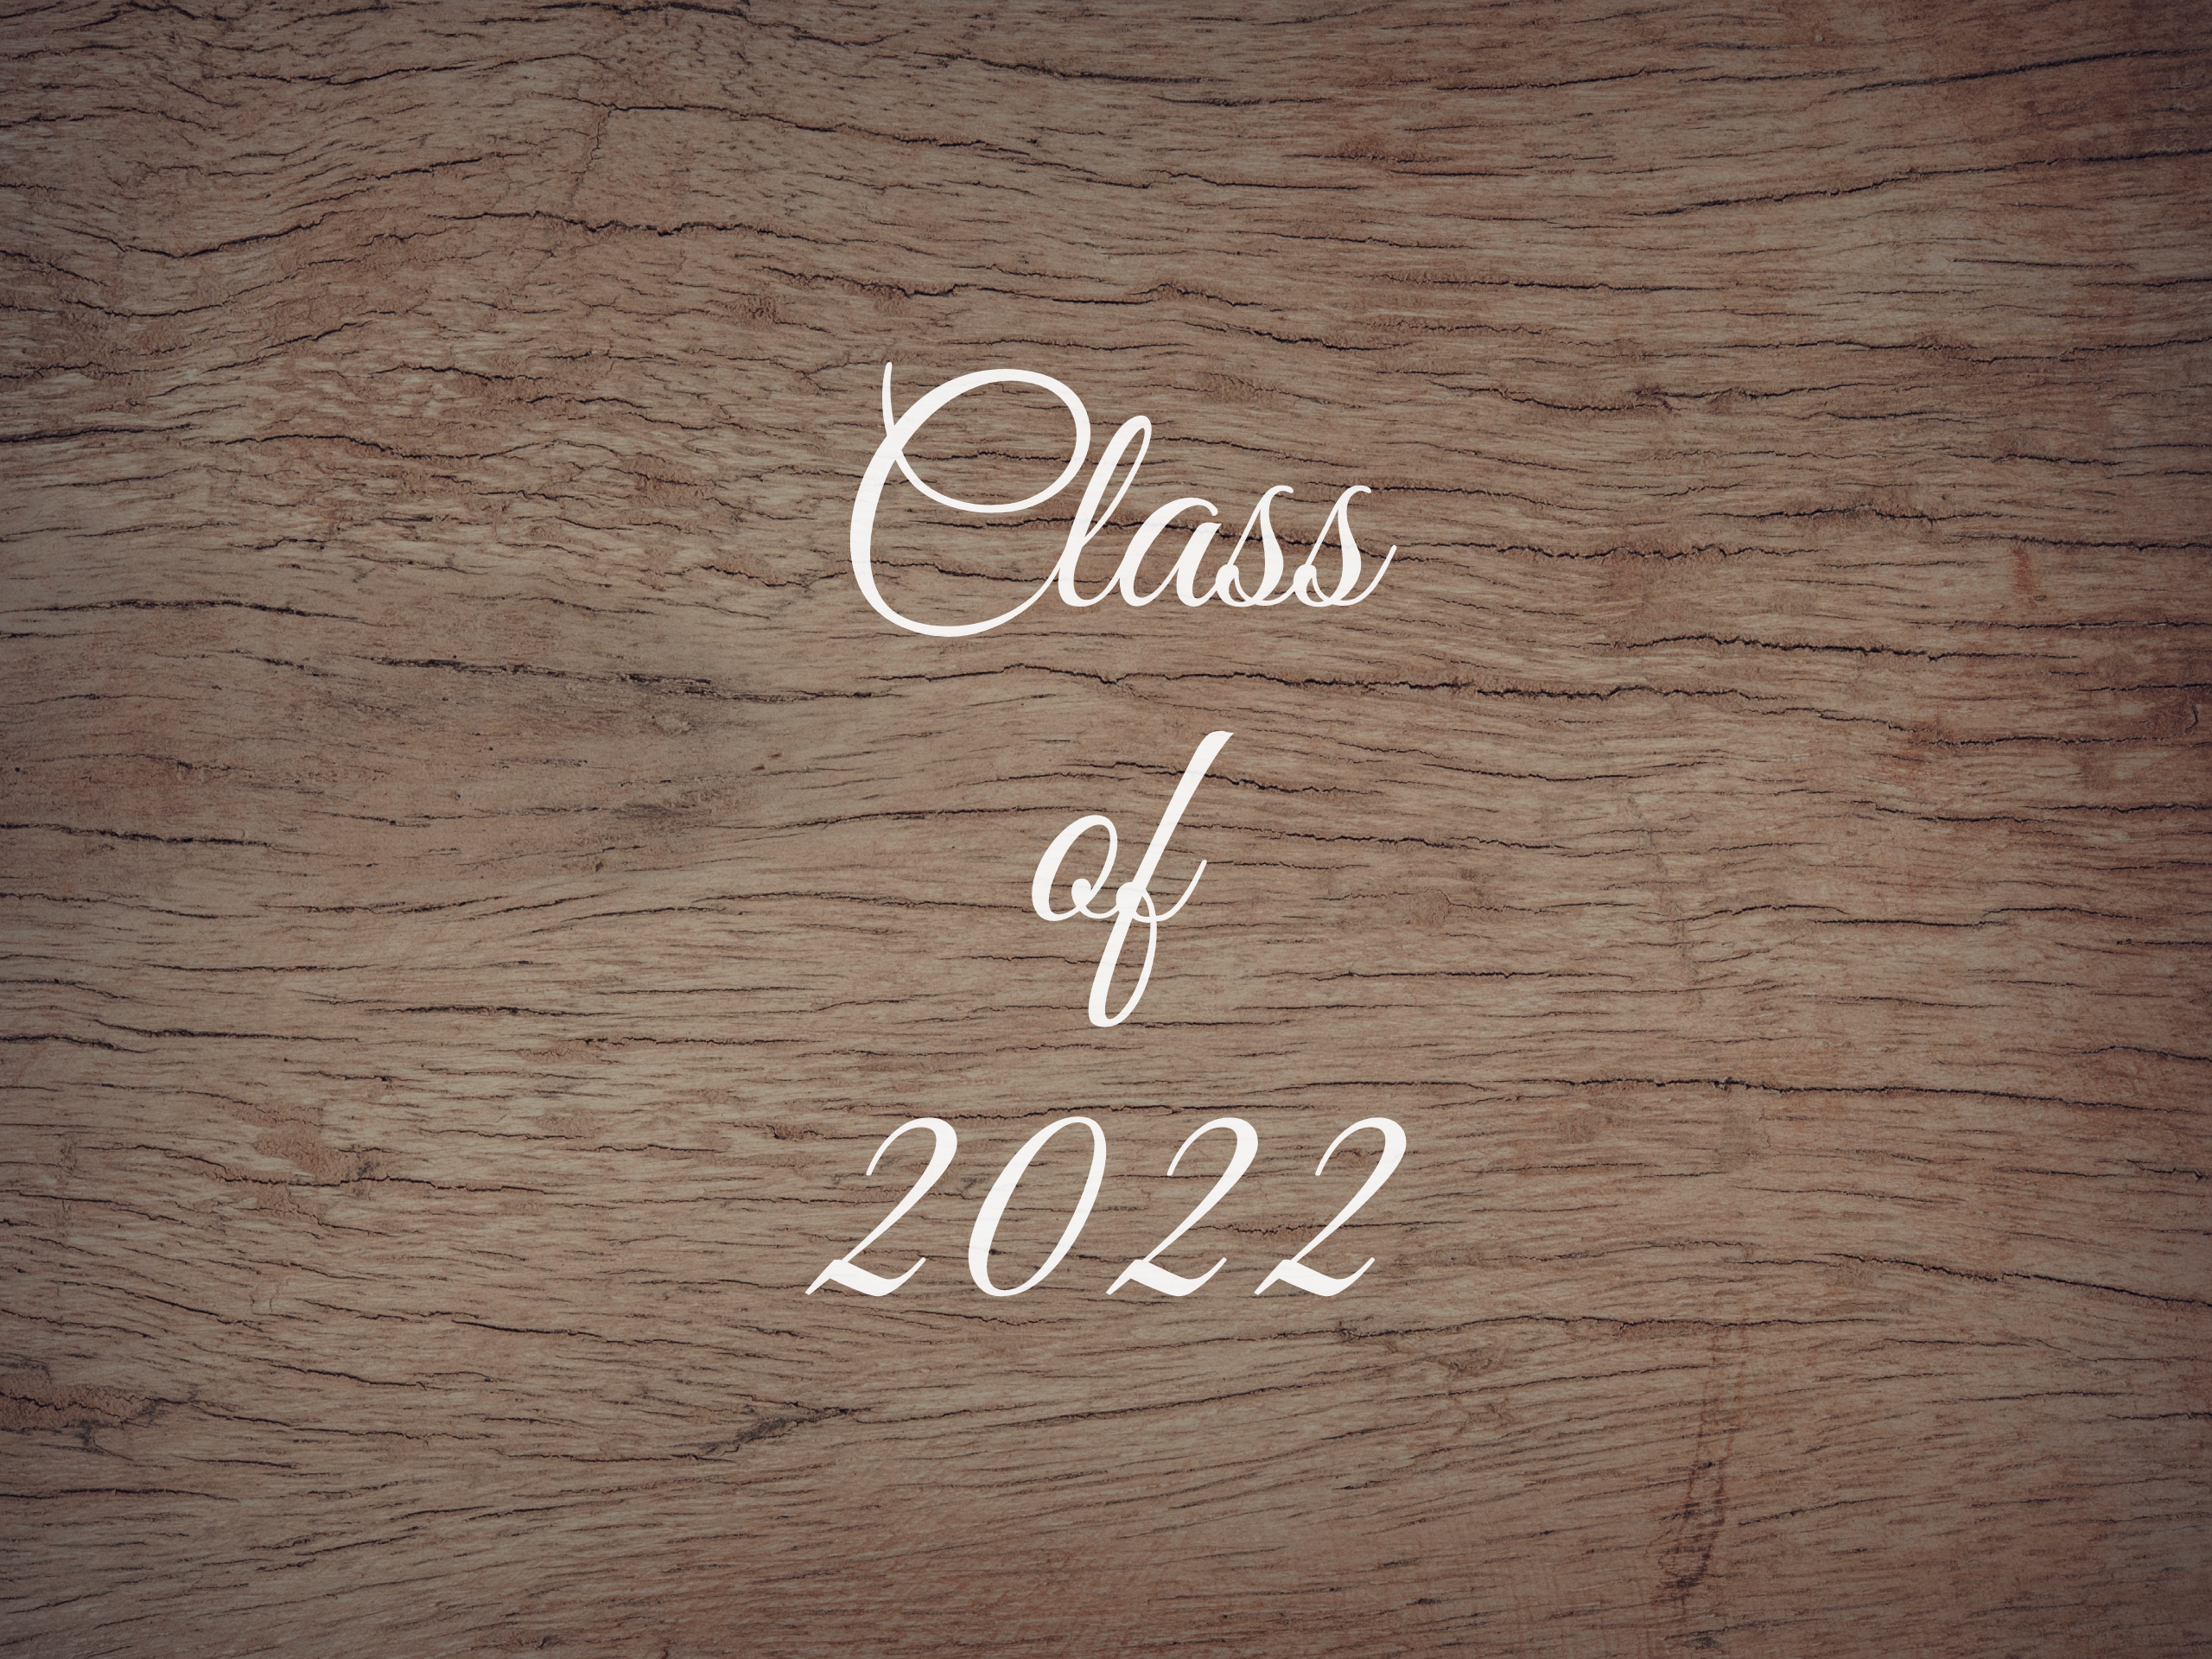 Class of 2022 Graduation Decal - Class of 2022 Graduation Vinyl Decals for Home, Gifts, Businesses and More!